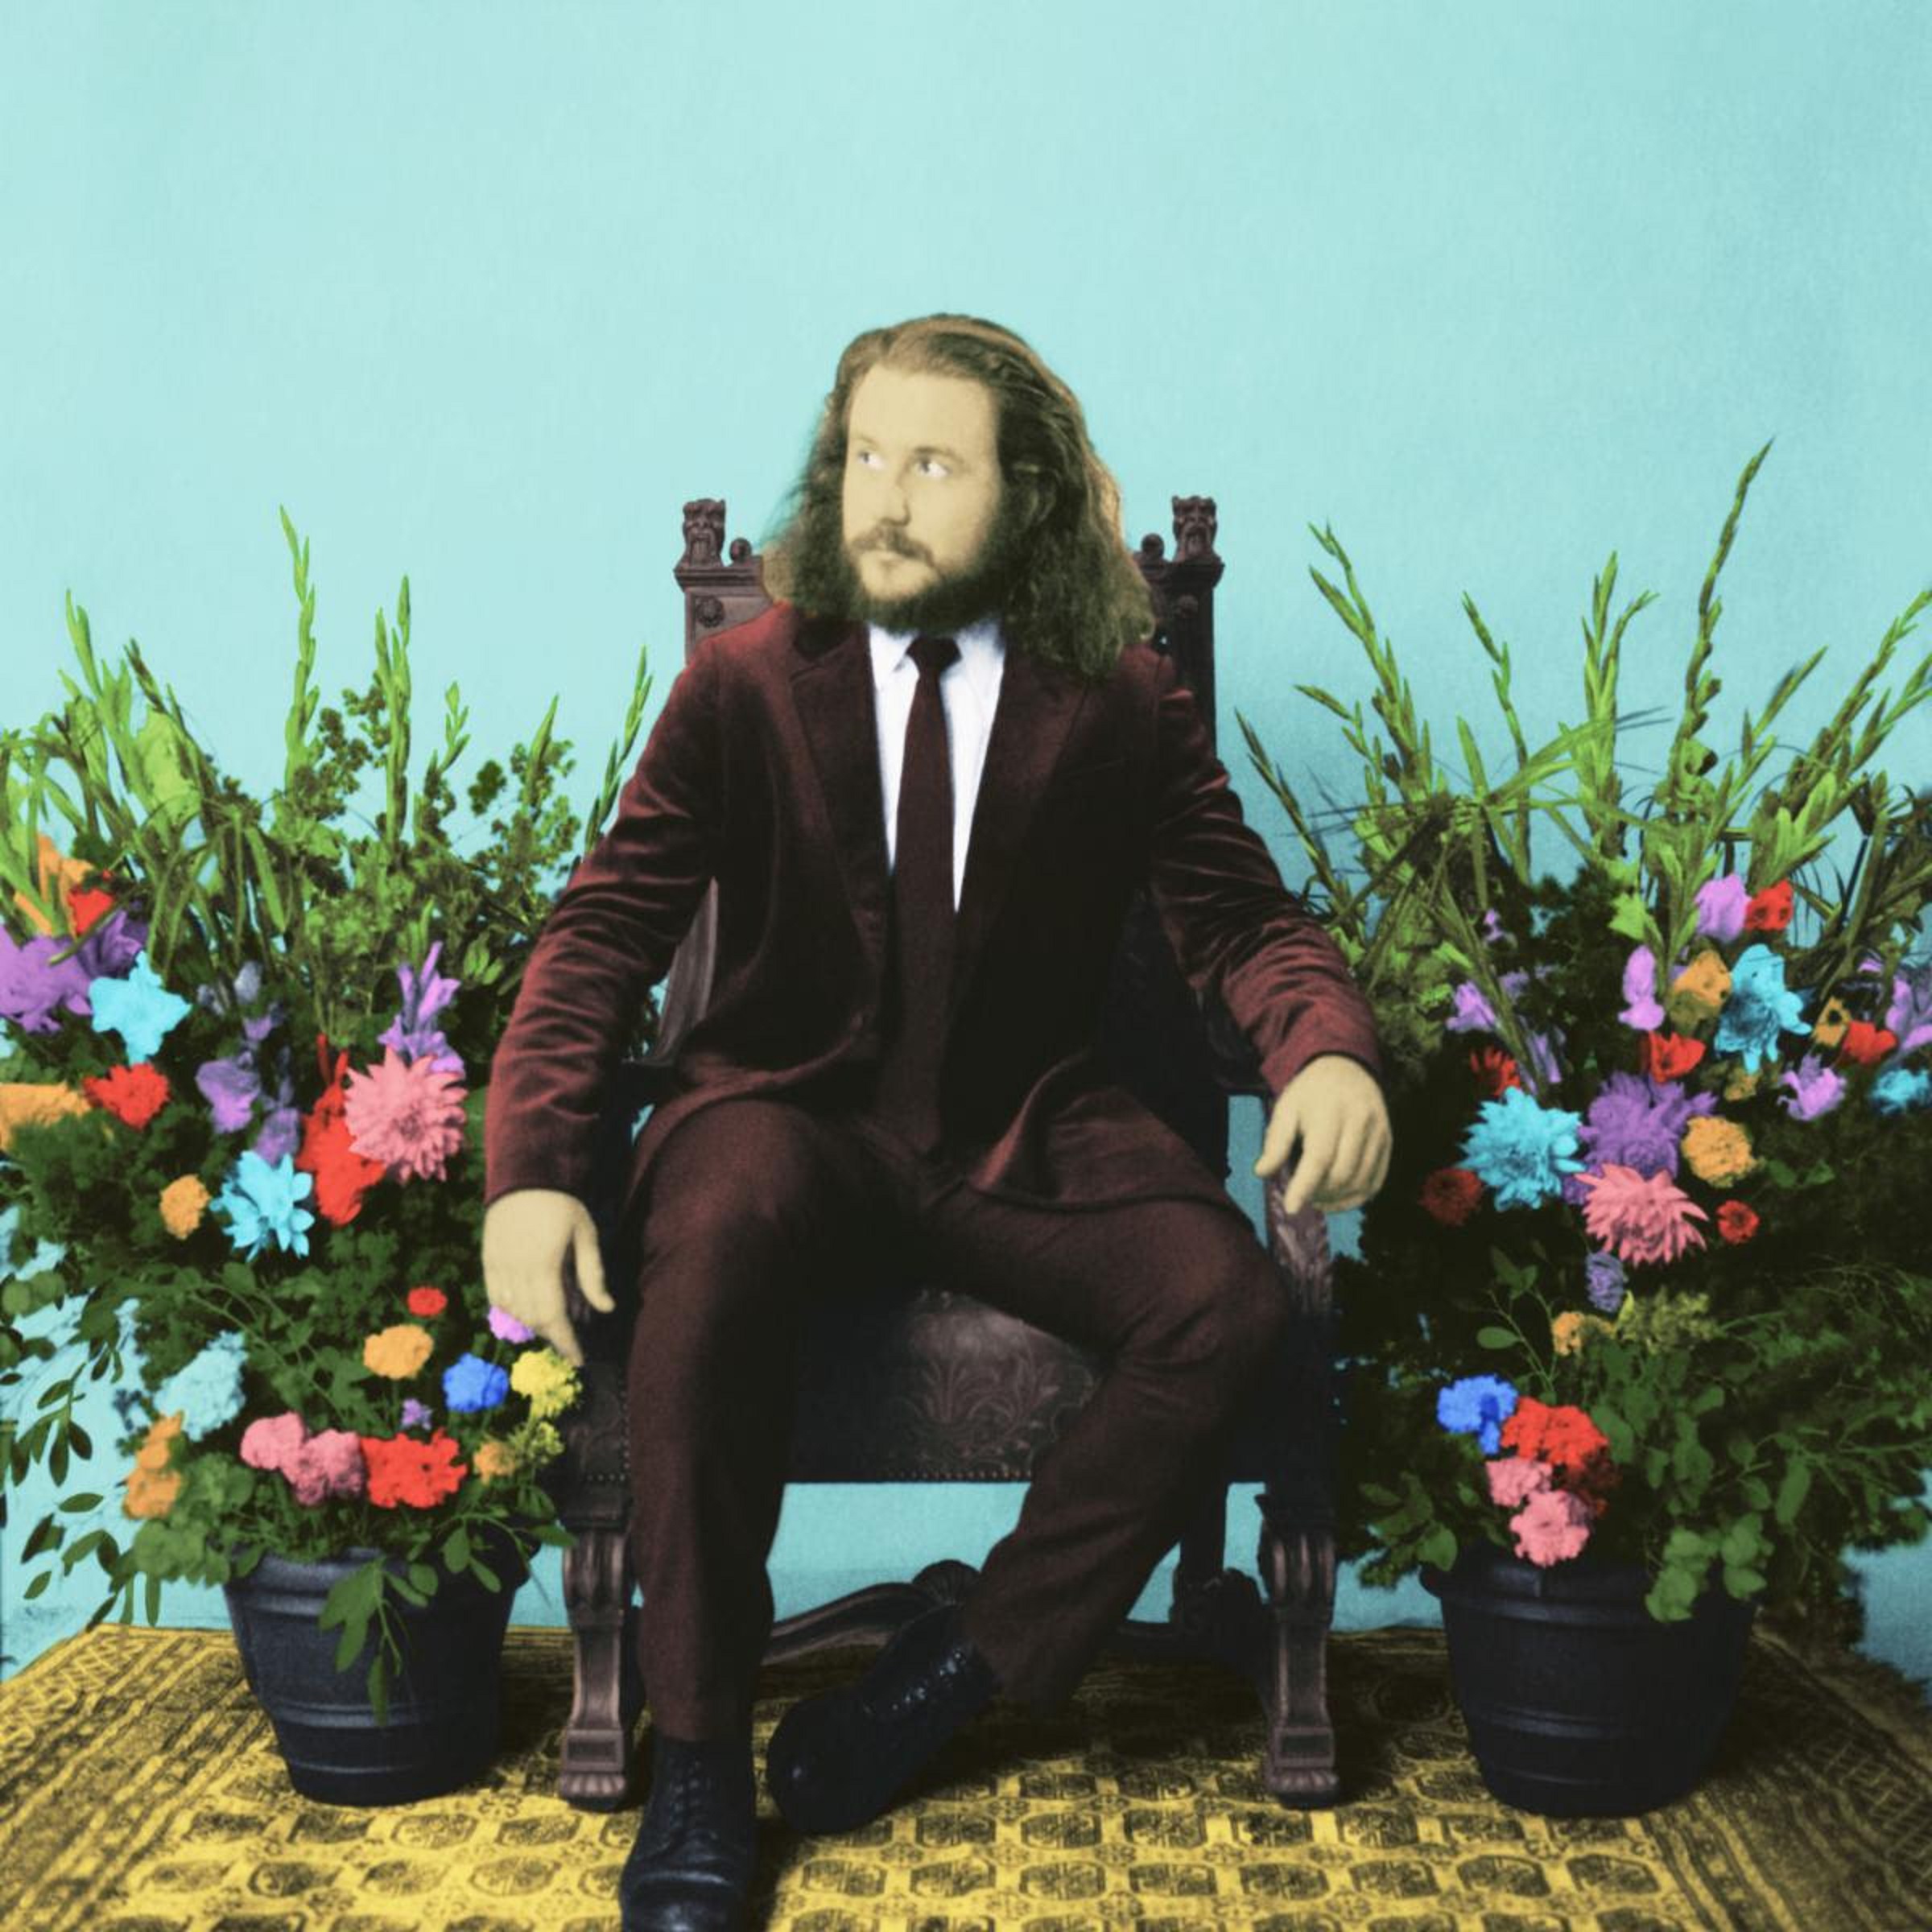 Jim James to release first solo album deluxe edition